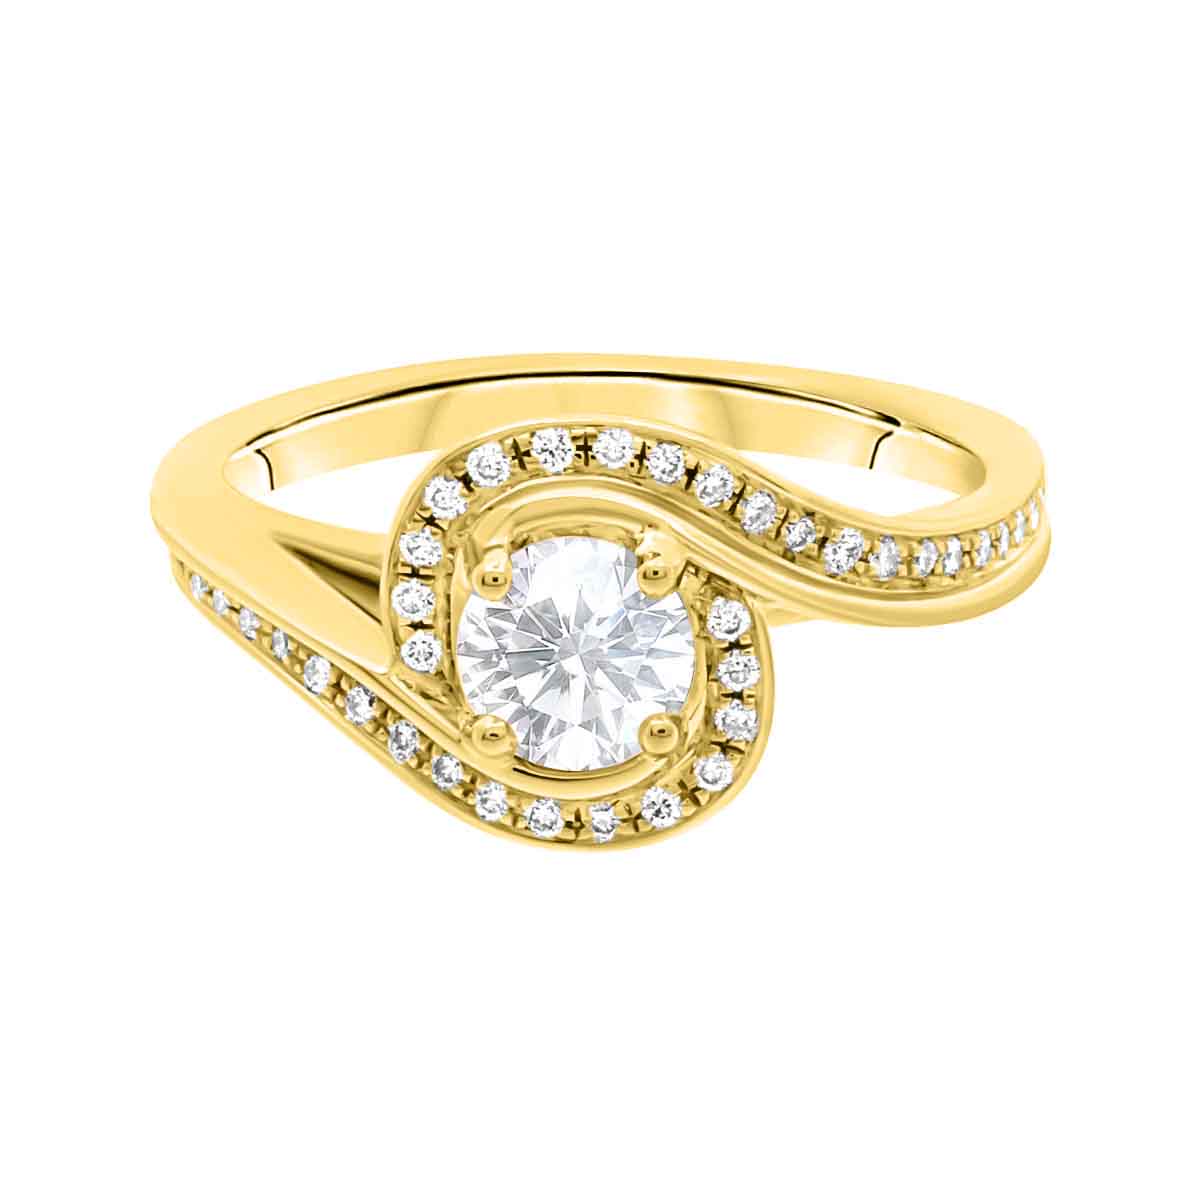 Contemporary Style Engagement Ring in yellow gold, lying flat, with a white background